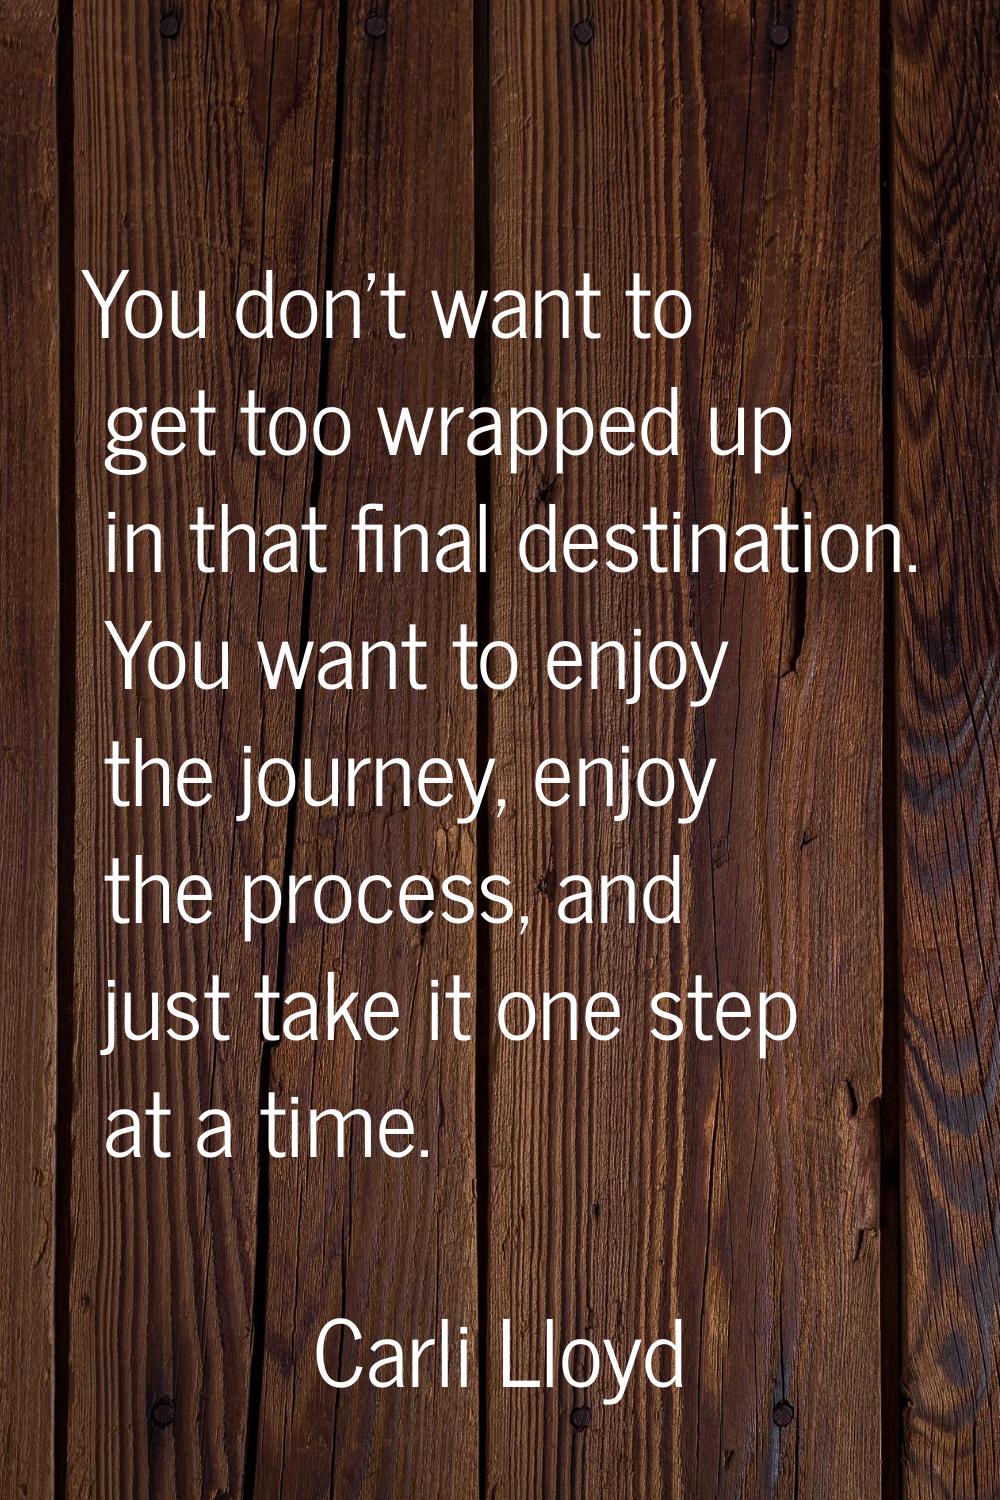 You don't want to get too wrapped up in that final destination. You want to enjoy the journey, enjo